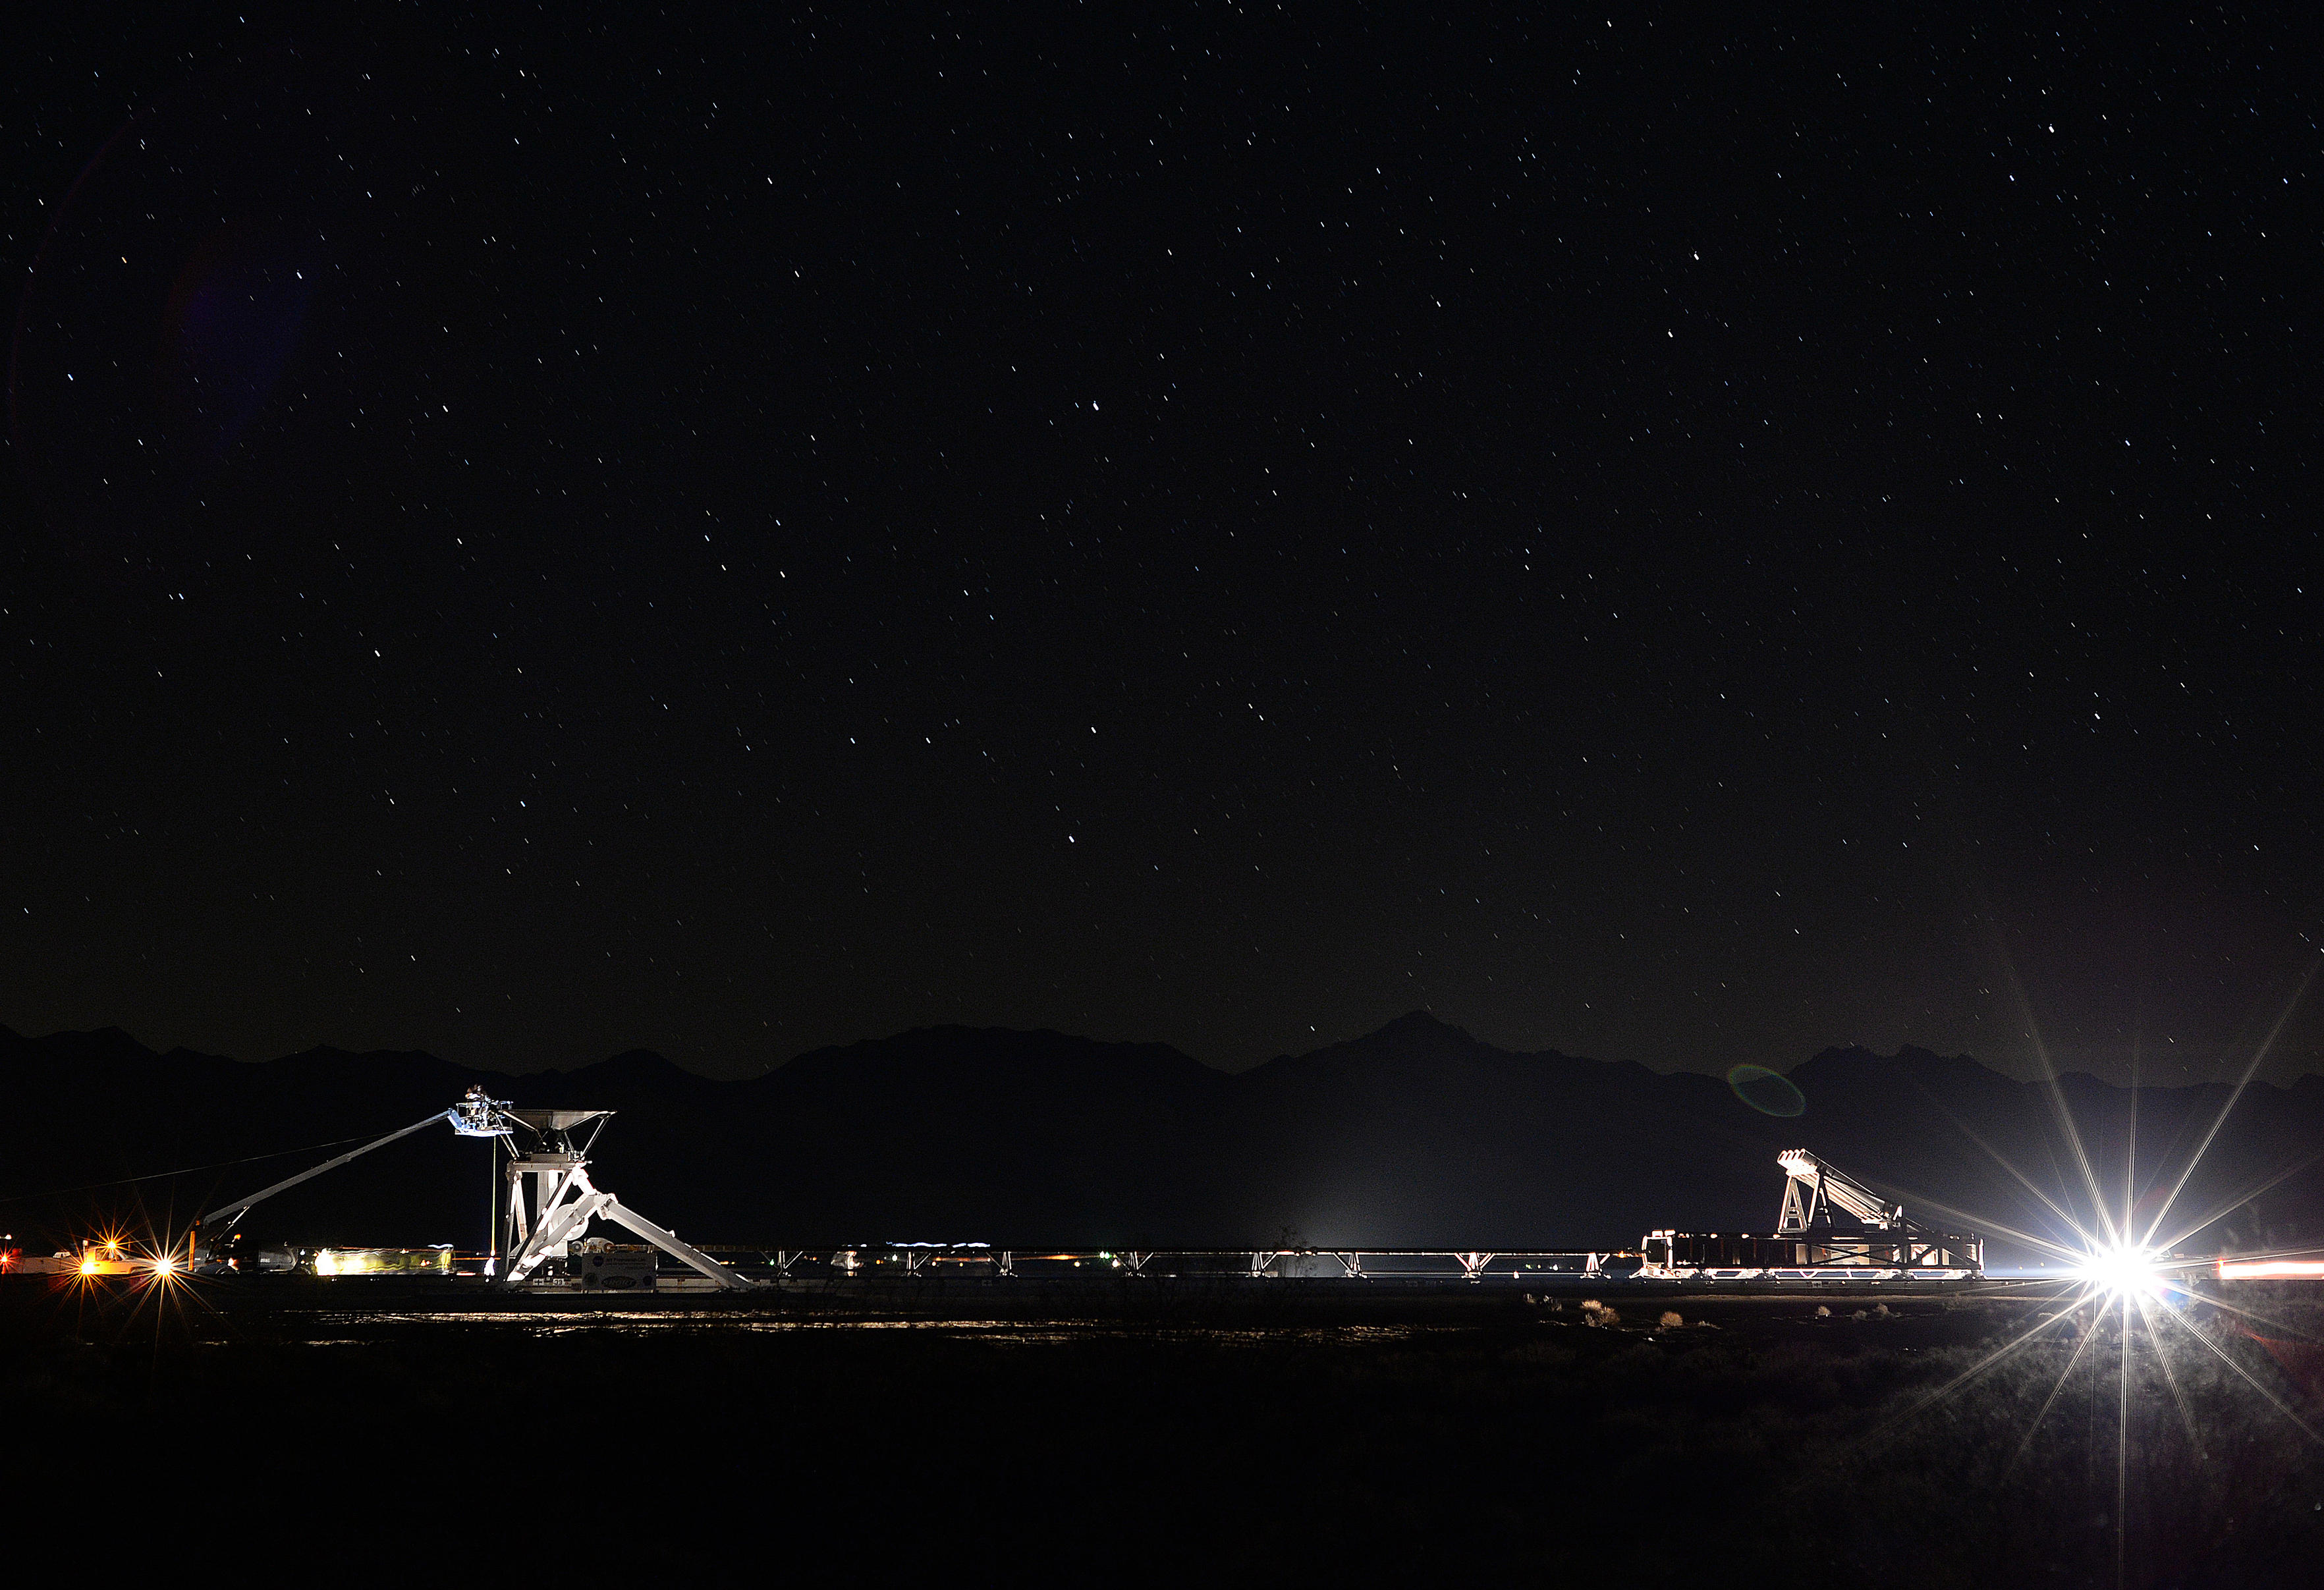 The tools of the rocket sled trade can be seen in this nighttime shot from the Supersonic Naval Ordnance Research Track (SNORT) at the Naval Air Weapons Station China Lake in California.